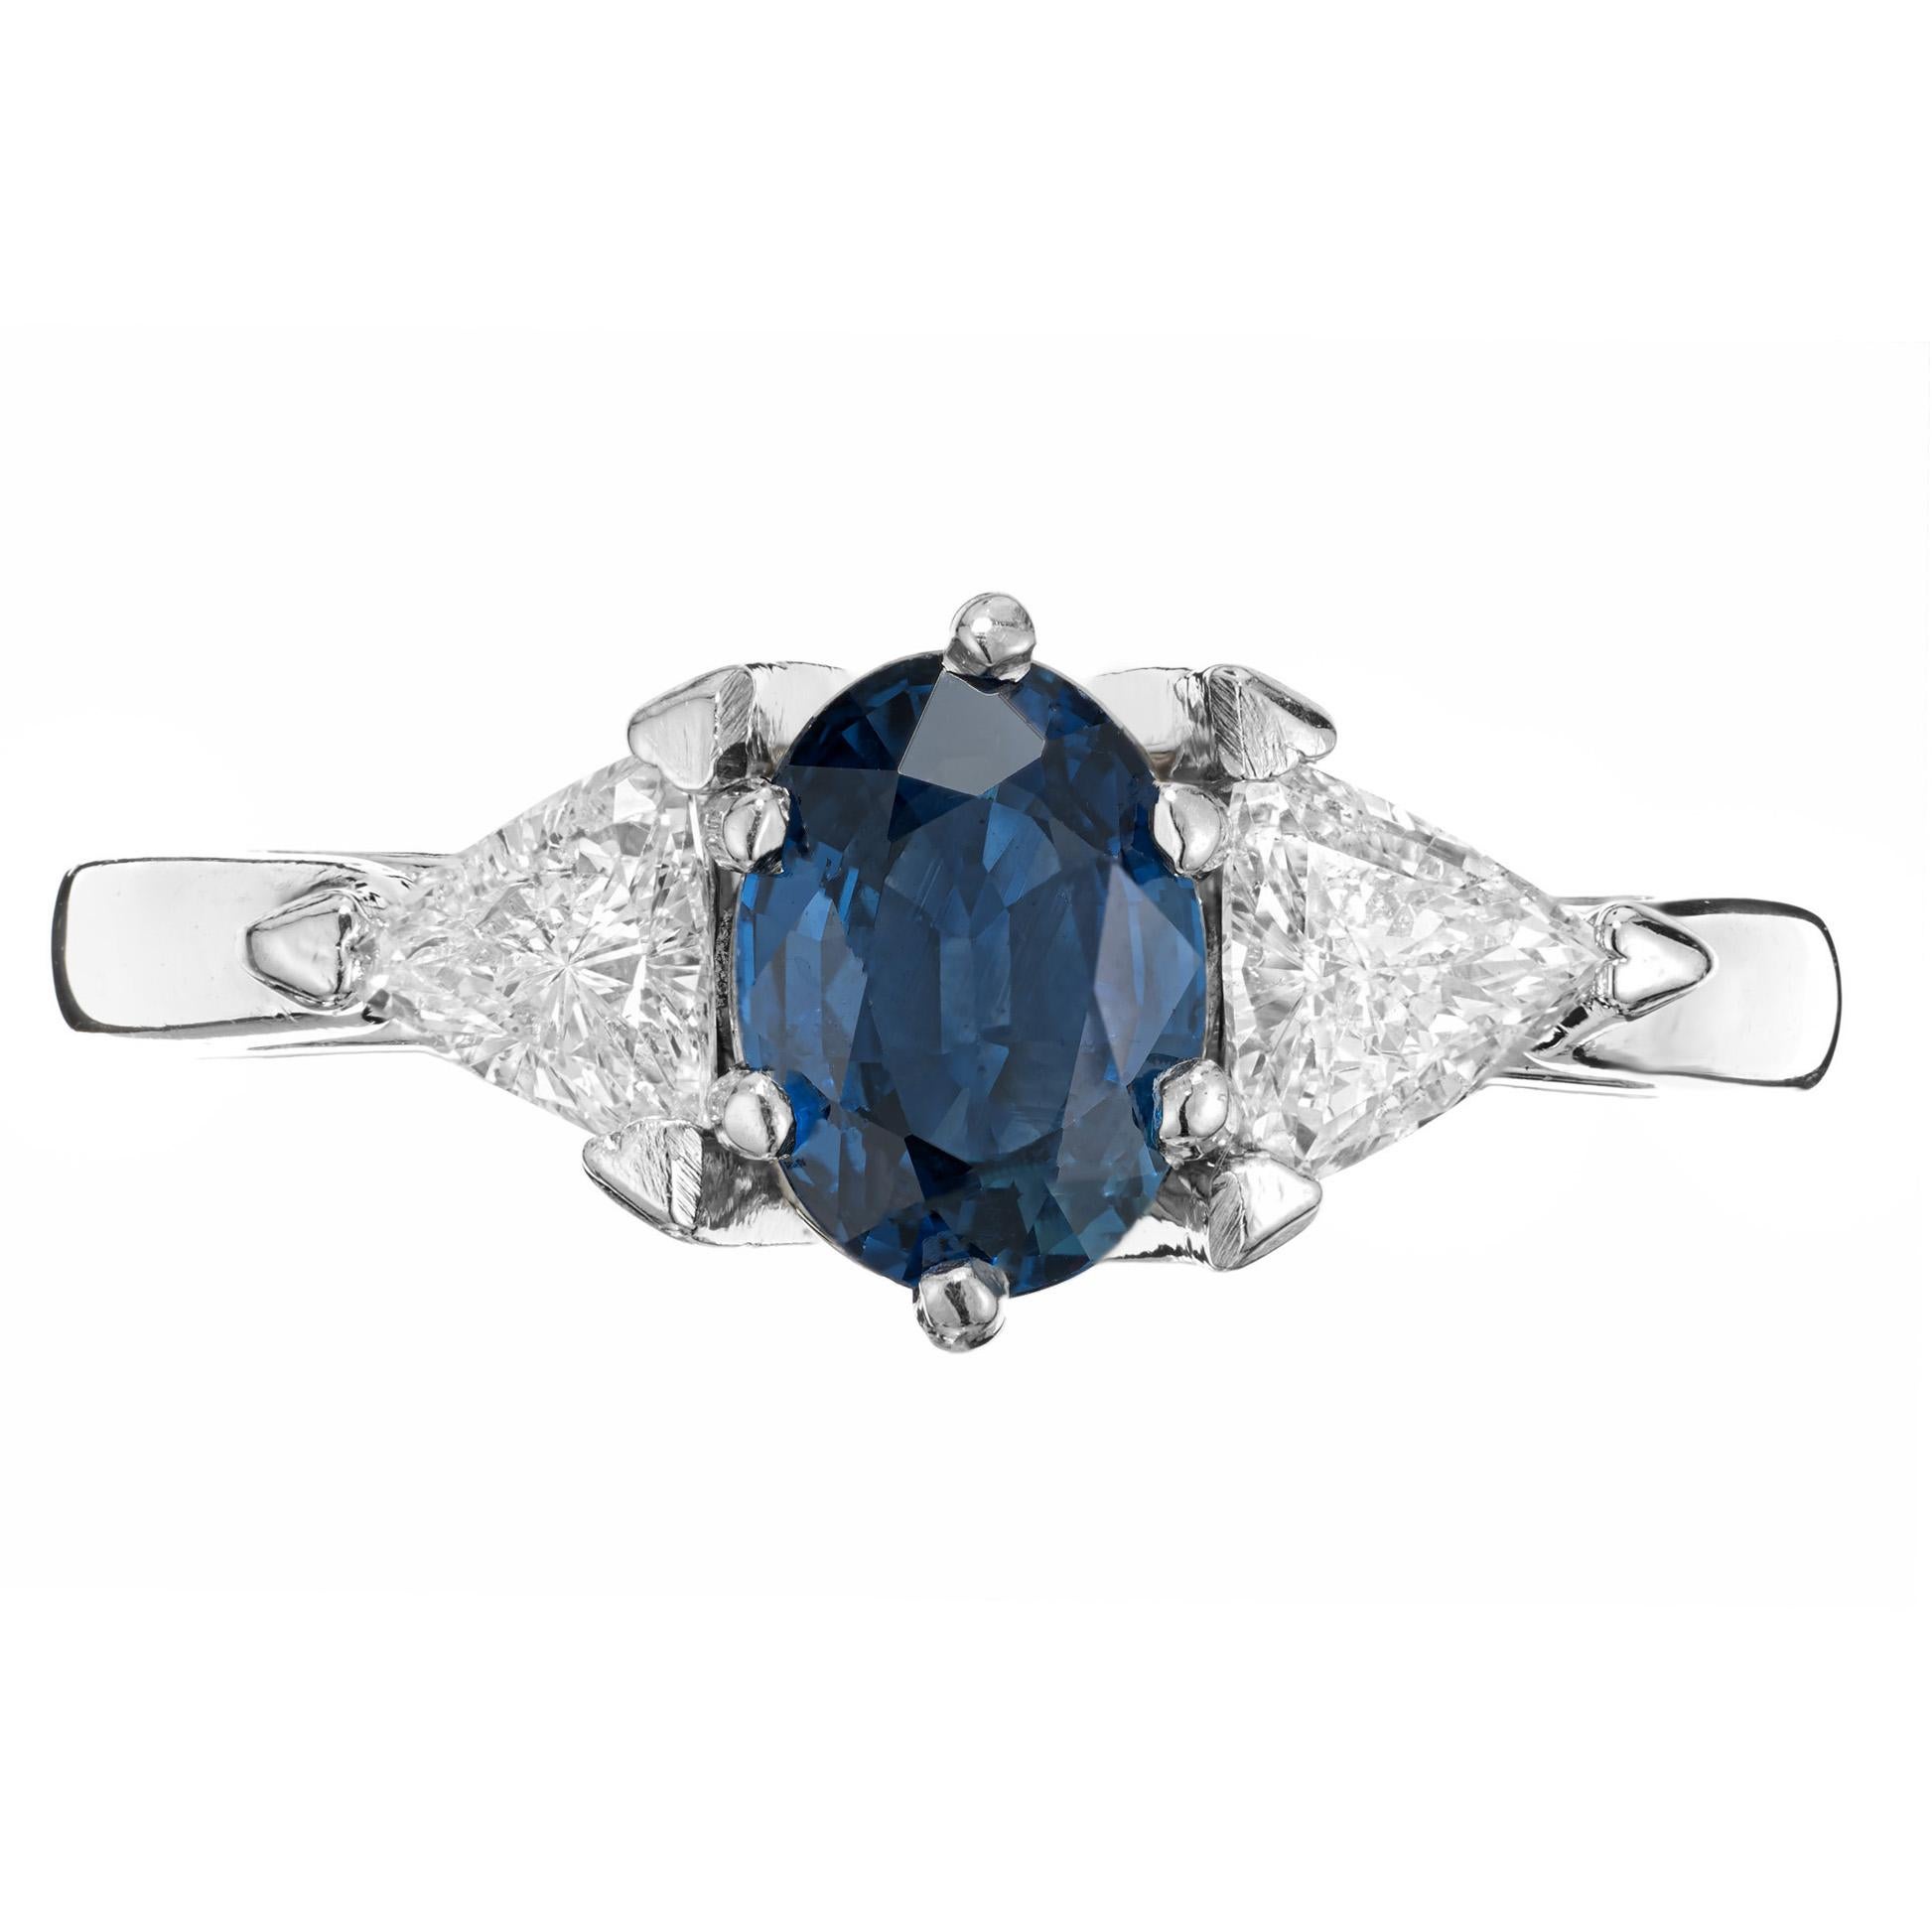 Bright cornflower blue sapphire diamond engagement ring. GIA certified natural no heat Sapphire mounted in a handmade setting with bright sparkly triangular bright white diamond side stones.

1 GIA certified 7.0 x 5.50mm natural bright blue no heat